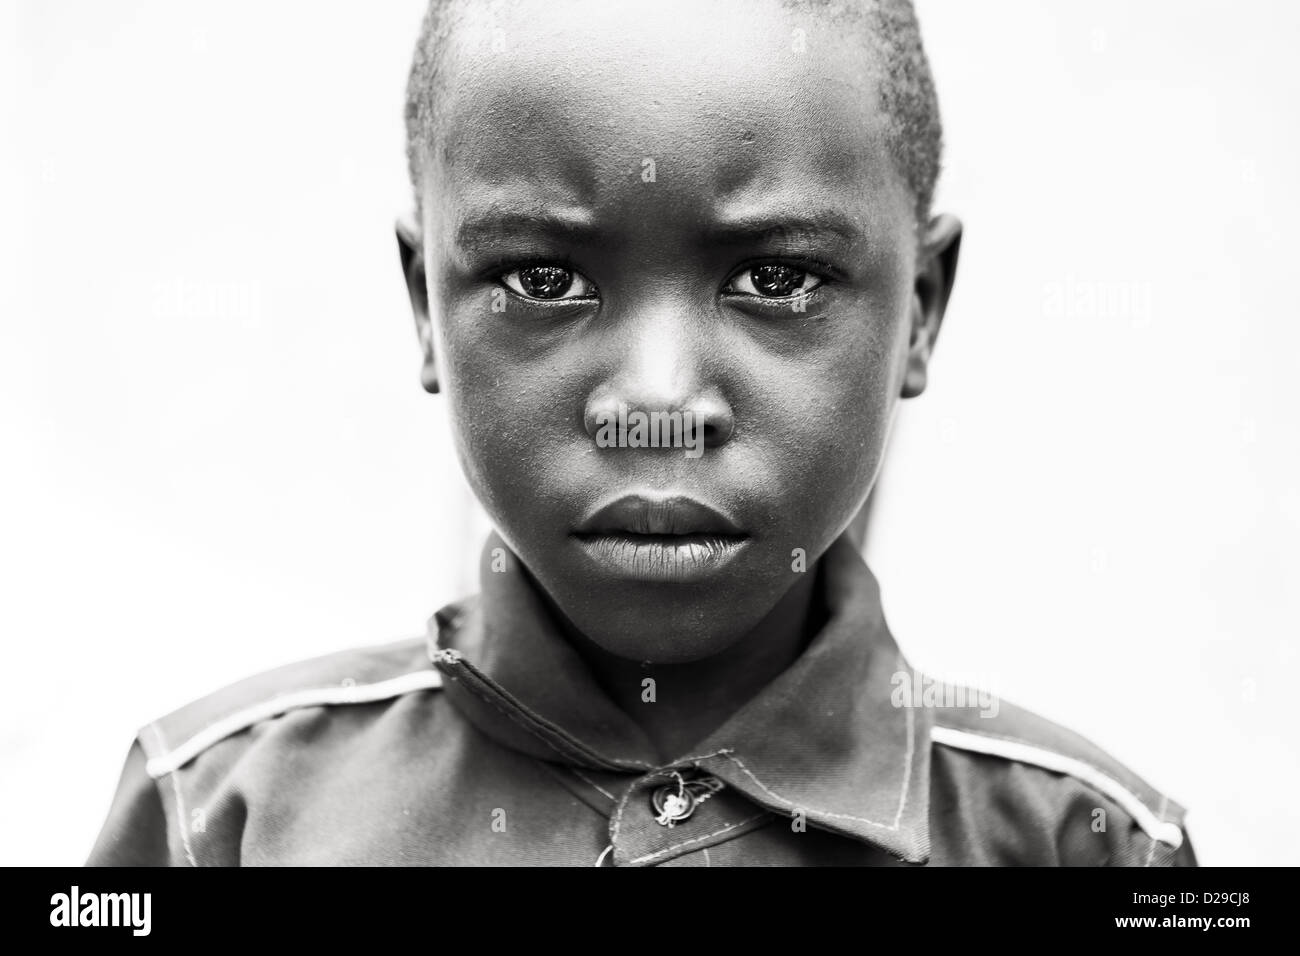 An African child looking intensely into the camera. Stock Photo